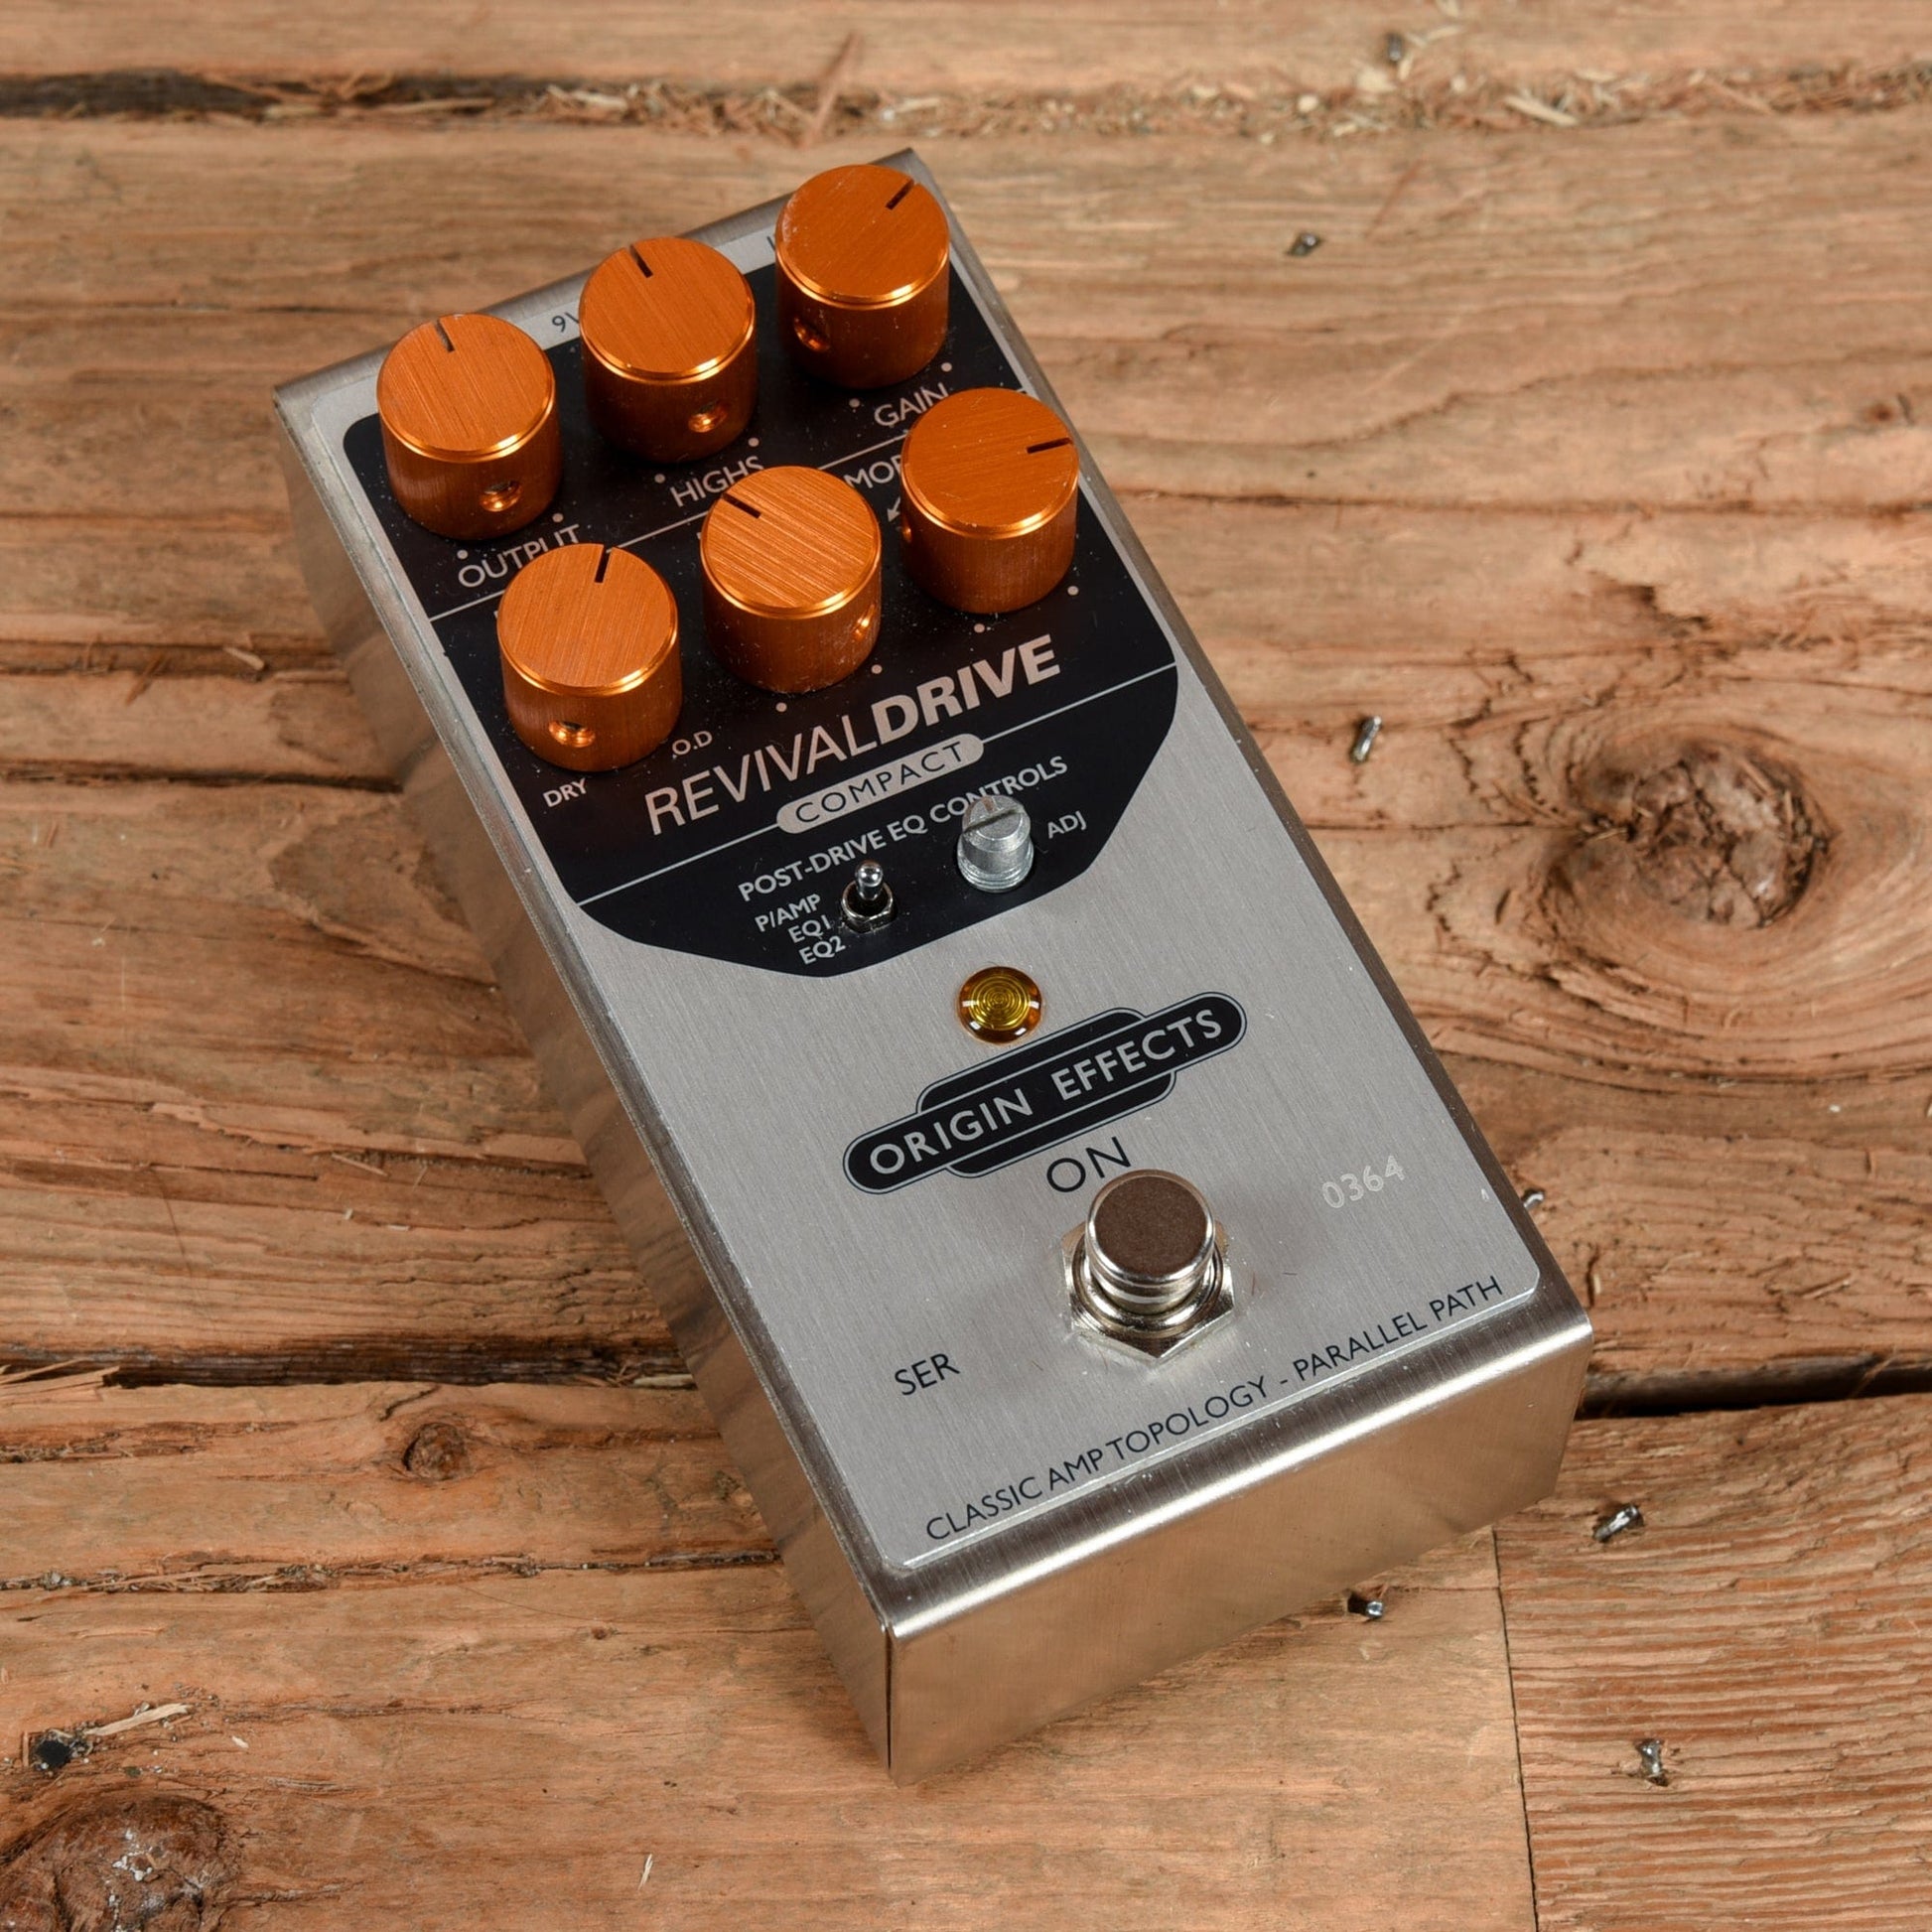 Origin Effects Revival Drive Compact Effects and Pedals / Overdrive and Boost